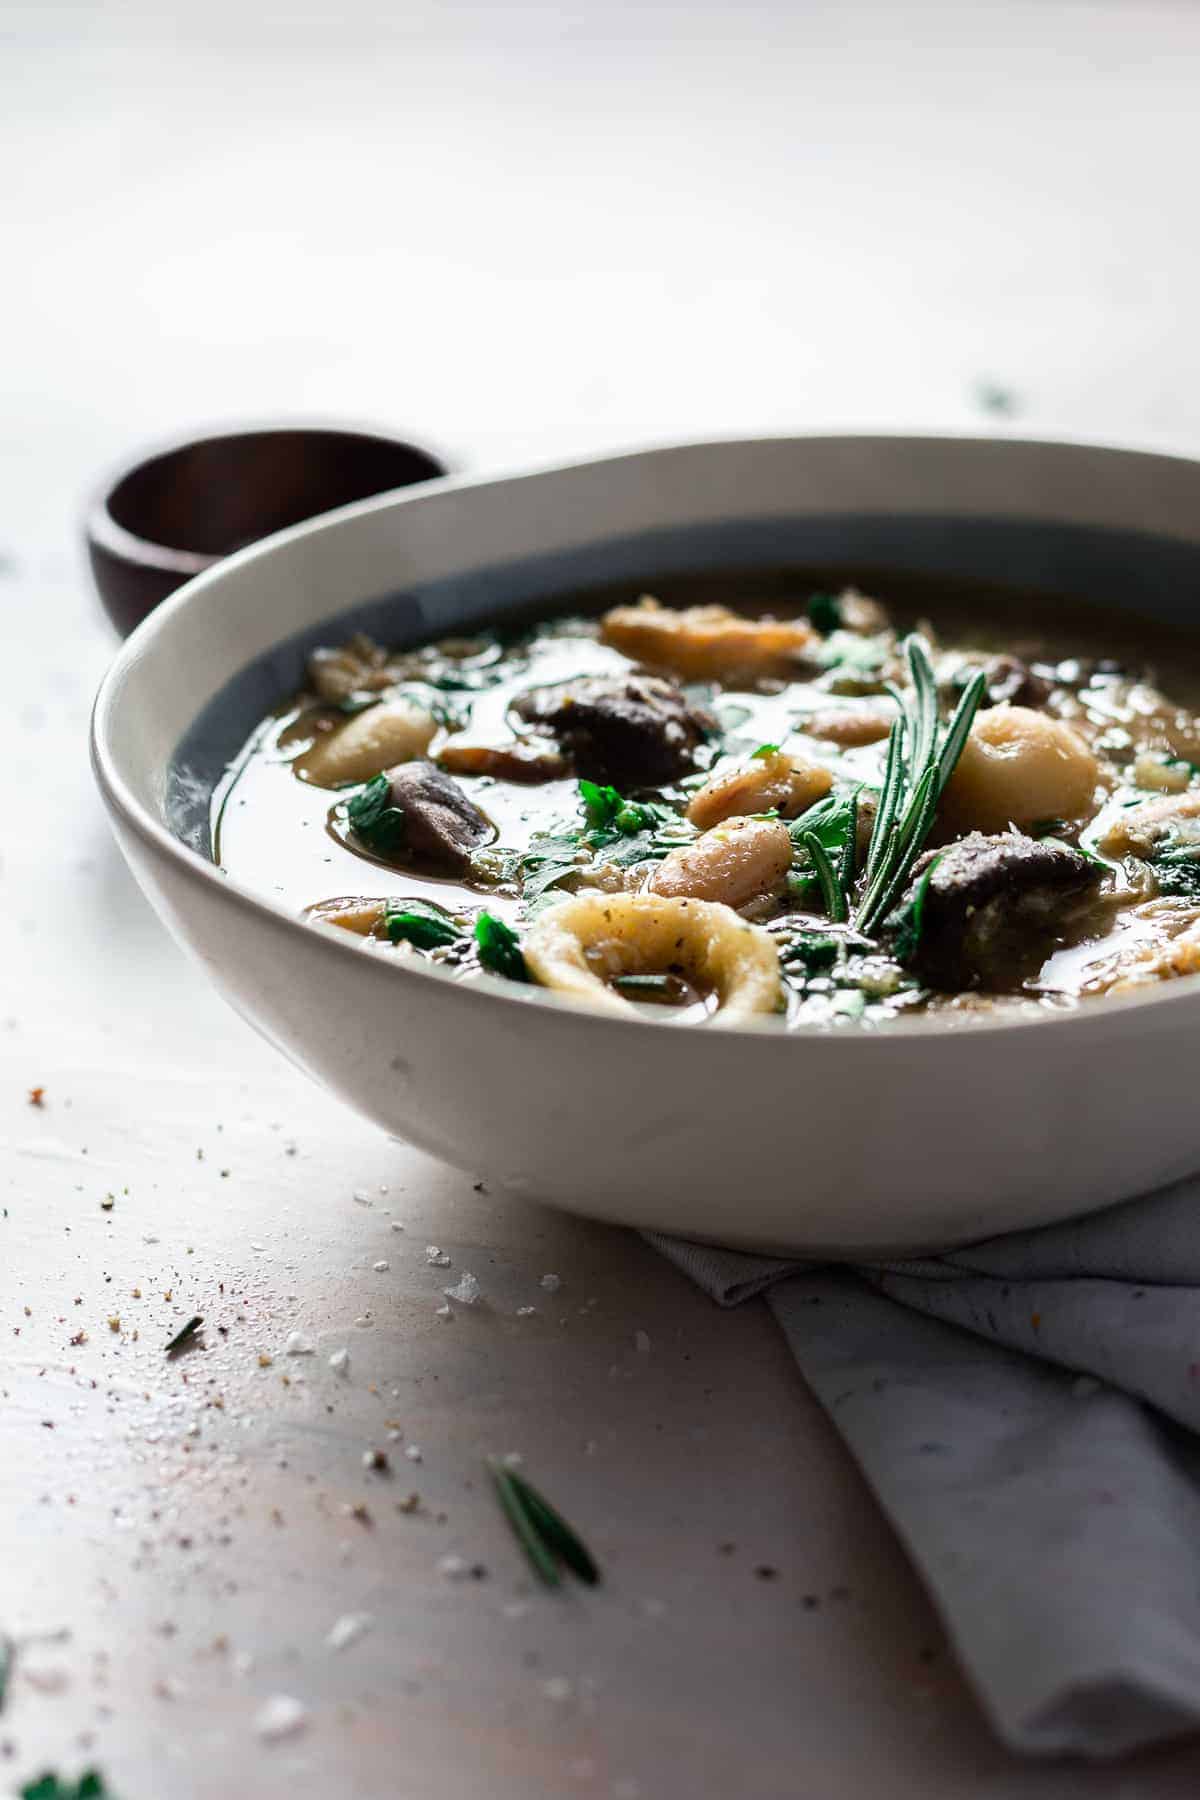 Flavorful and hearty, this Italian chicken and mushroom soup is warming to the soul and is totally easy to make a big batch of on a chilly night! Packed with flavor and delicious ingredients, you'll love this soup for fall and winter nights when all you want is something warm and comforting. #italiansoup #soup #chickensoup #mushroomsoup #souprecipes #italianrecipes